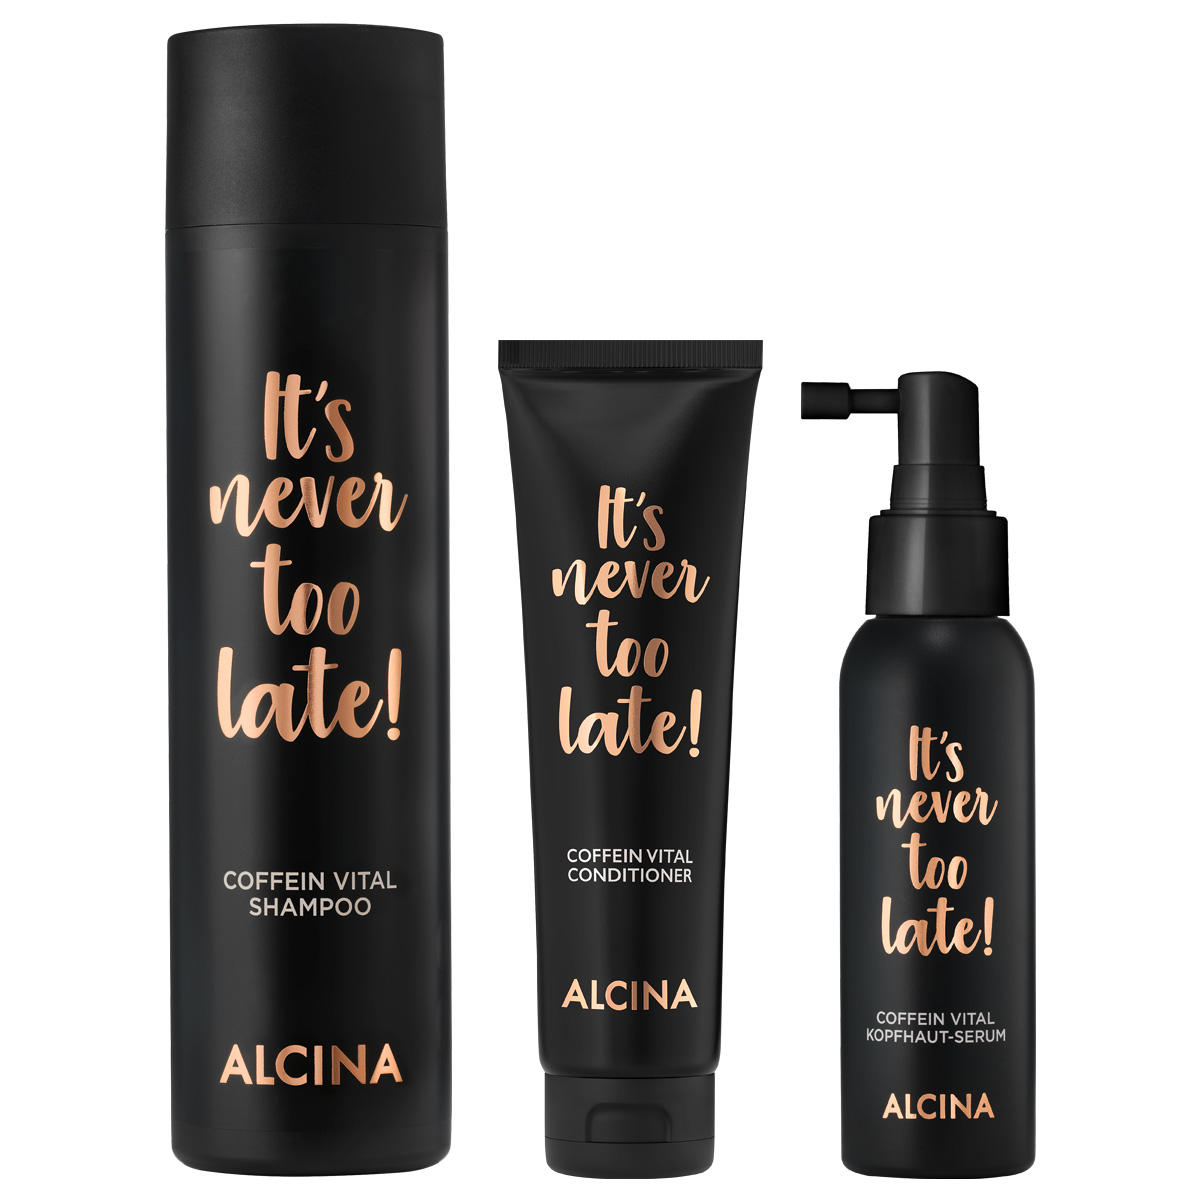 Alcina It's never too late Haircare Set  - 1